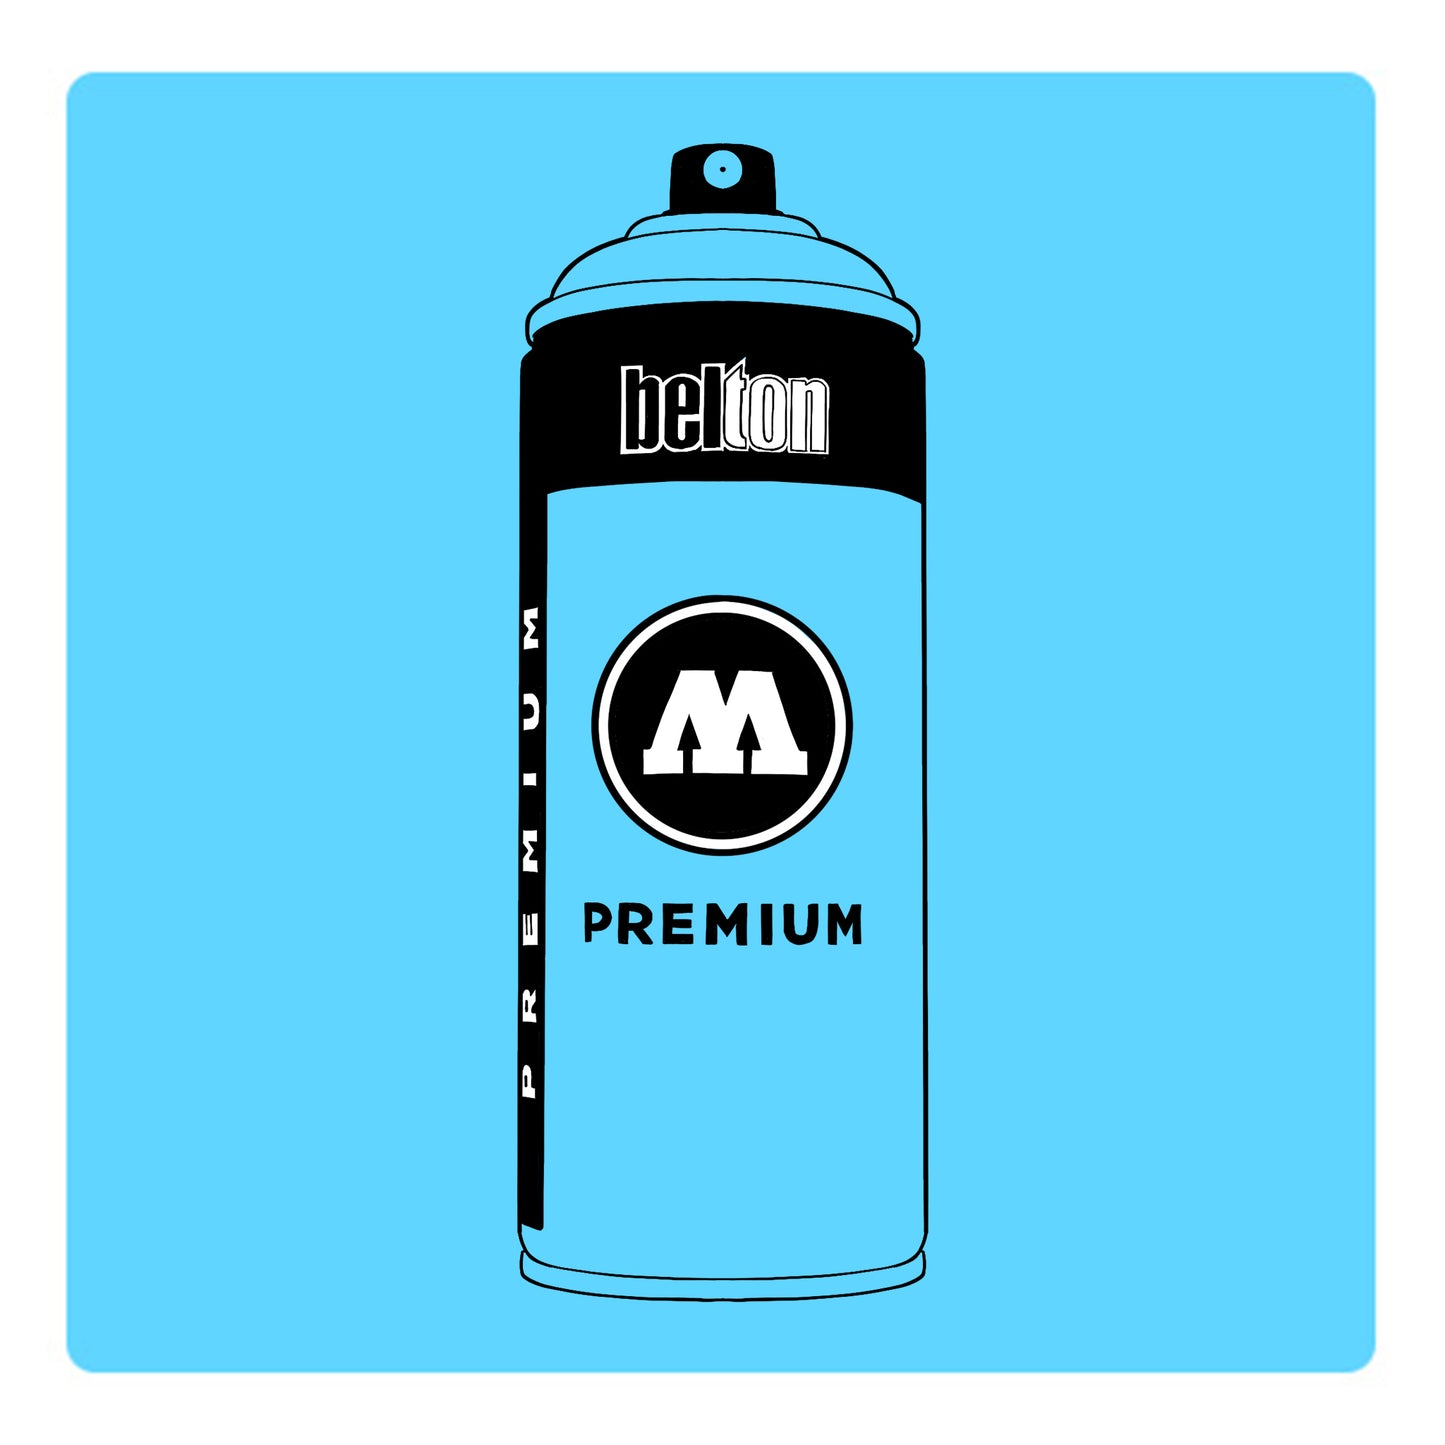 A black outline drawing of a bright sky blue spray paint can with the words "belton","premium" and the letter"M" written on the face in black and white font. The background is a color swatch of the same bright sky blue with a white border